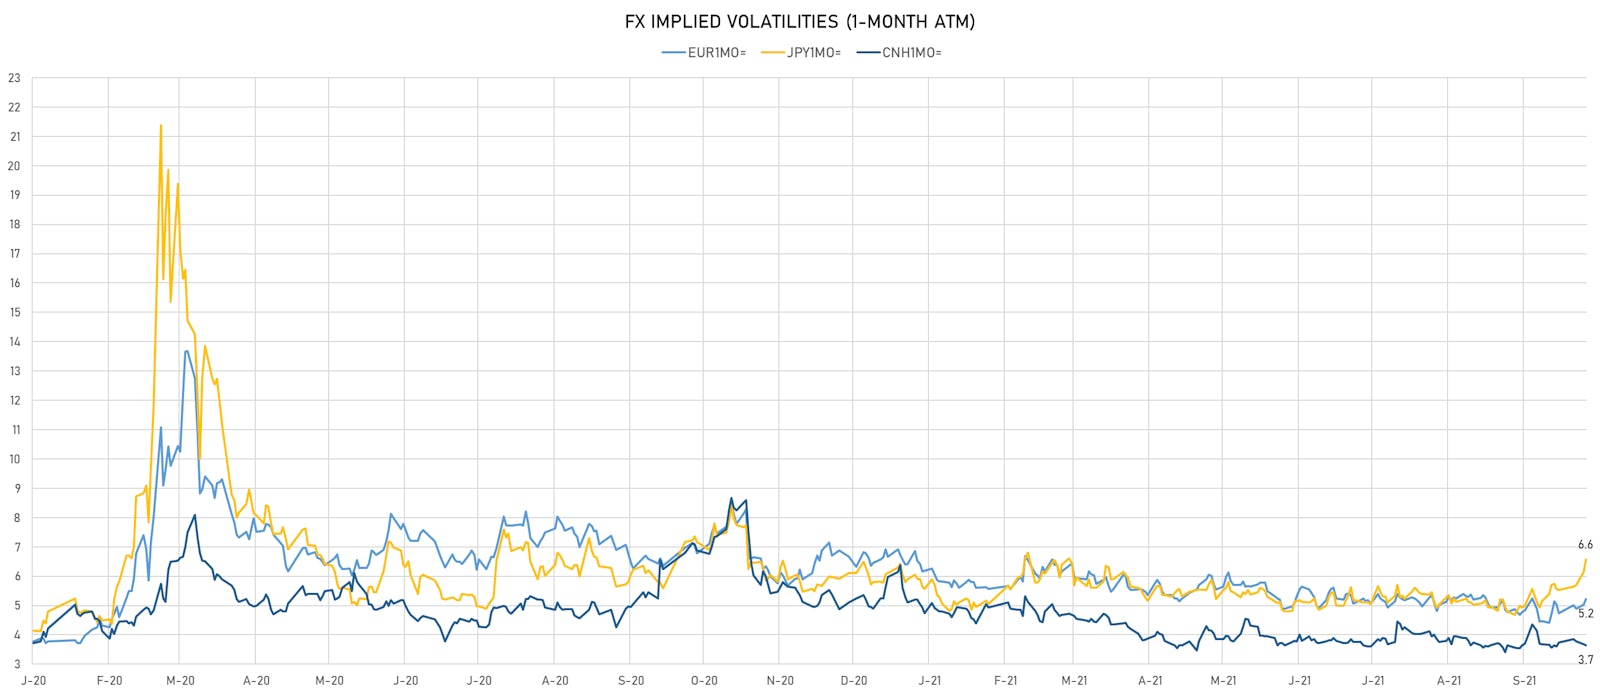 EUR, JPY, CNH 1-Month At-The-Money Implied Volatilities | Sources: ϕpost, Refinitiv data